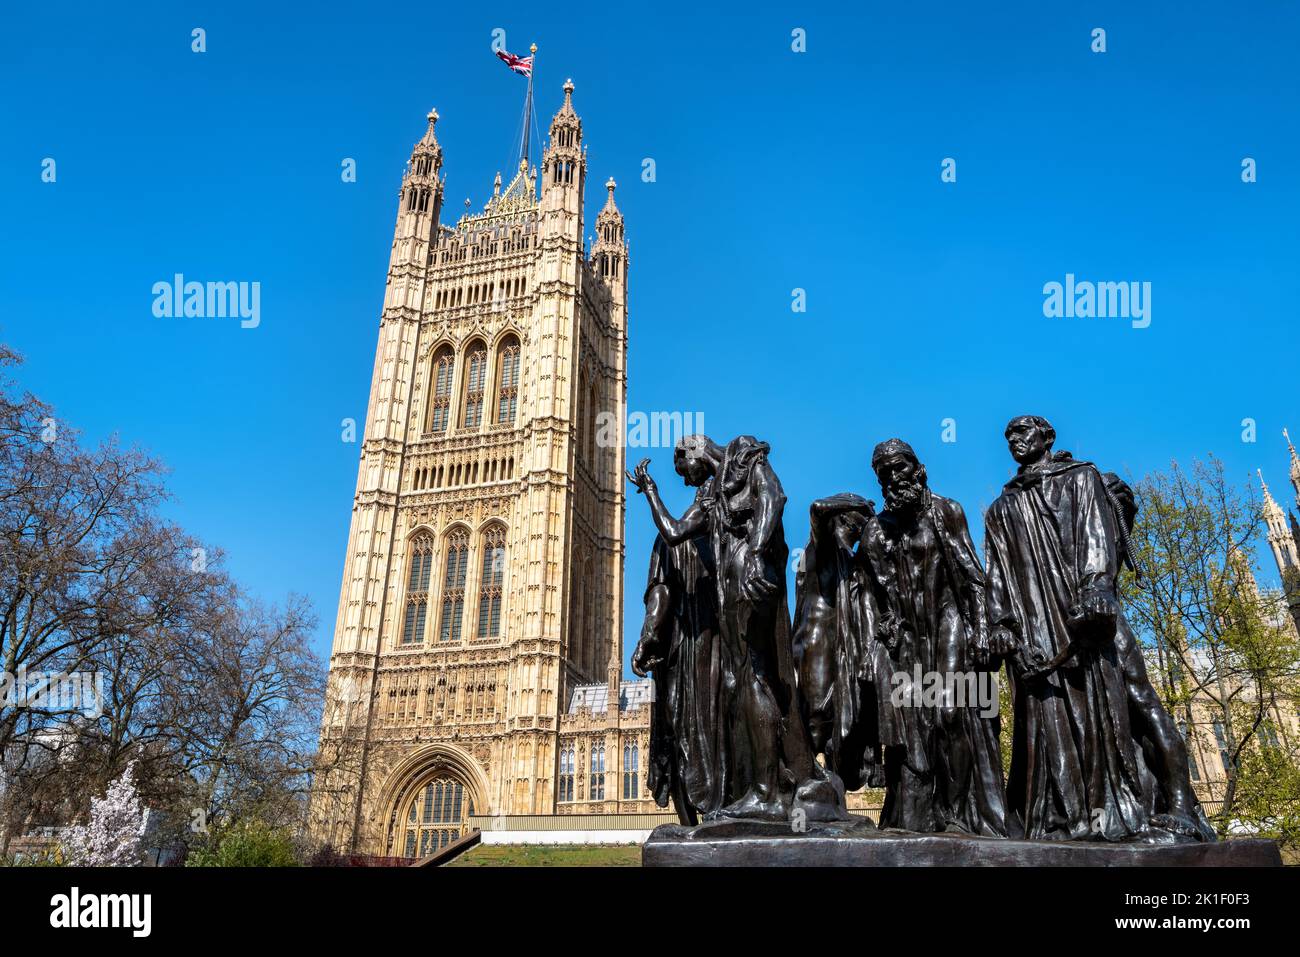 The Burghers of Calais statue, by Auguste Rodin, completed in 1889, outside of the Houses of Parliament, London, UK. The Victoria Tower has a Union Ja Stock Photo